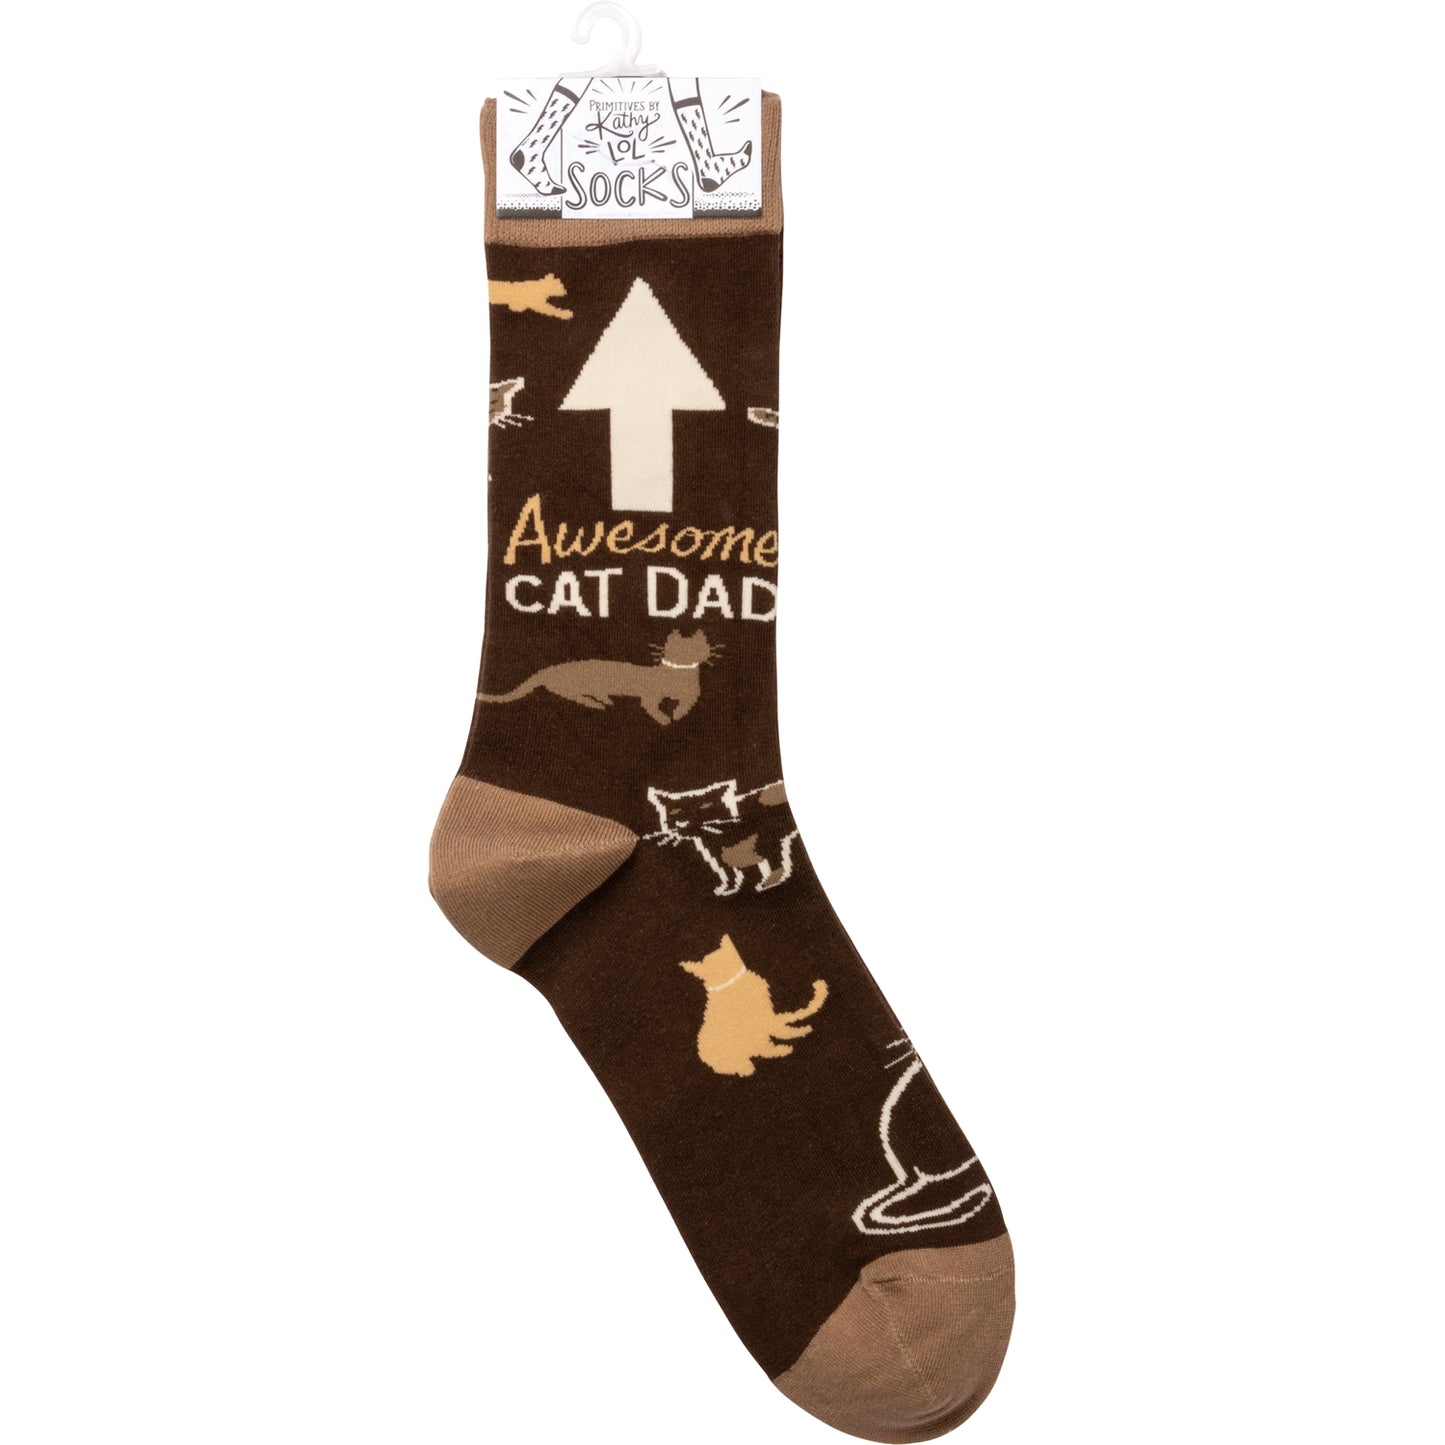 Awesome Cat Dad Socks (One Size Fits Most)